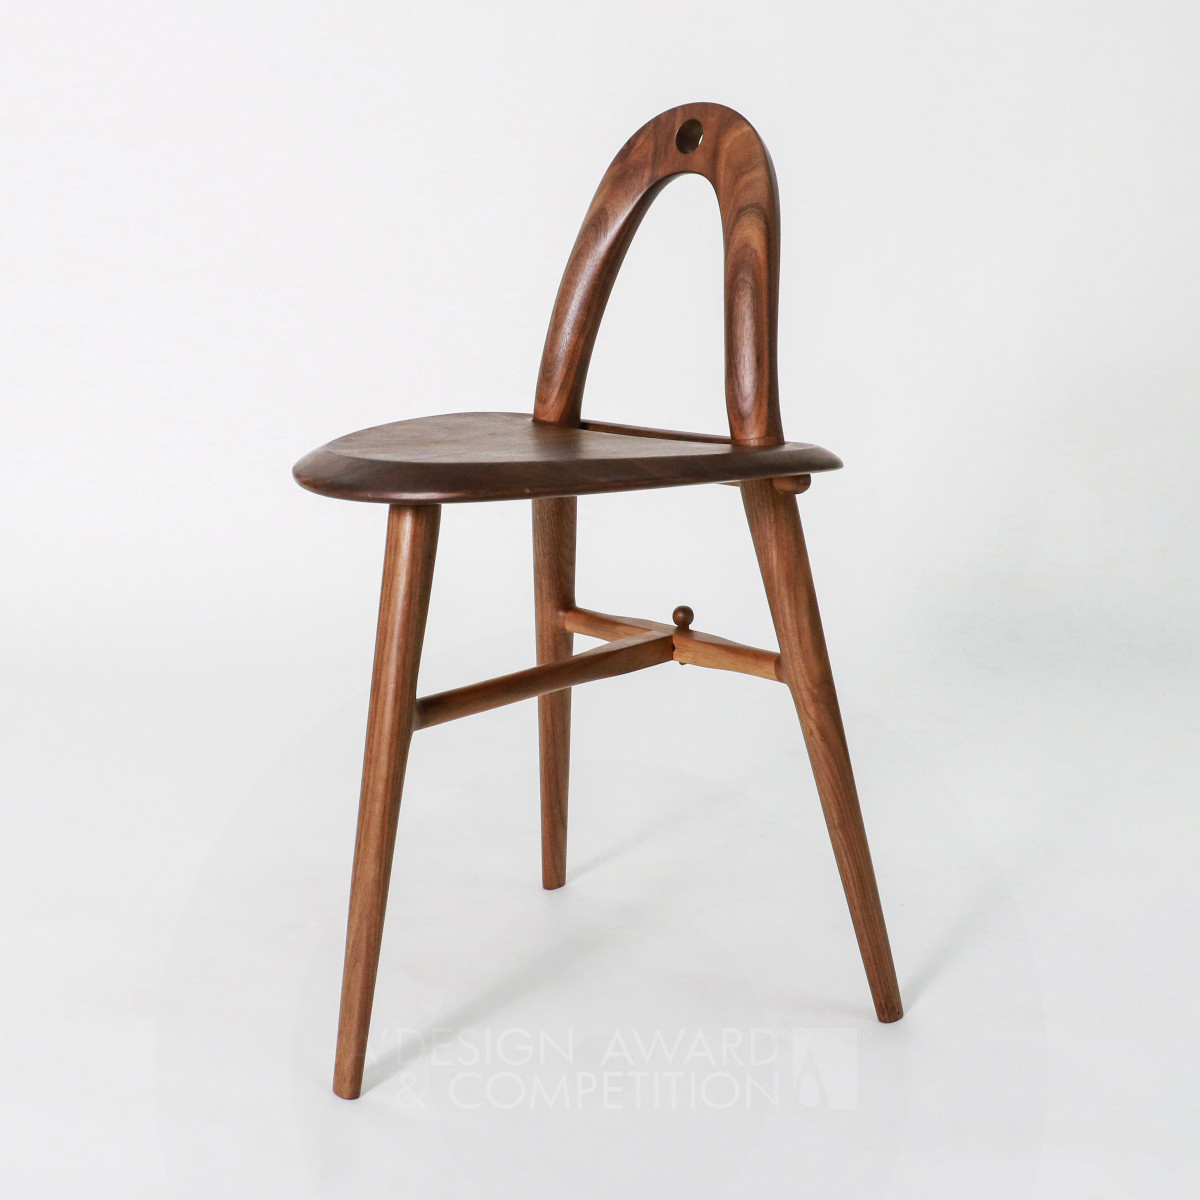 Xu Le wins Bronze at the prestigious A' Furniture Design Award with Moon Chair Self Assembled Seating.